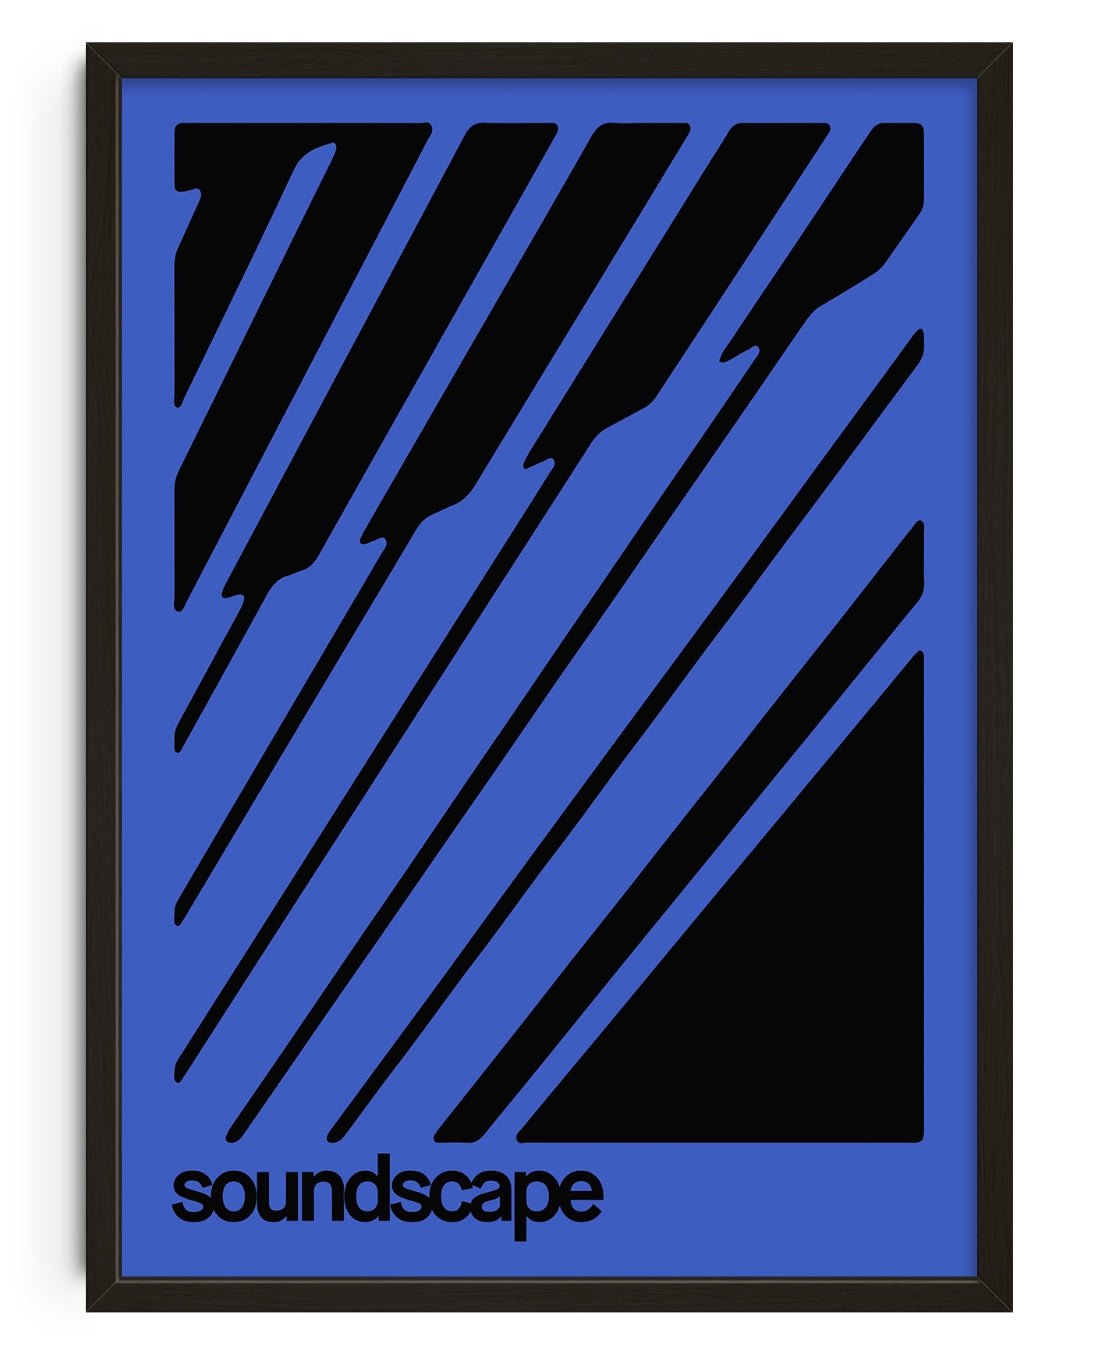 11.7x16.5" (A3) Soundscape - UNFRAMED contemporary wall art print by Adam Foster - sold by DROOL